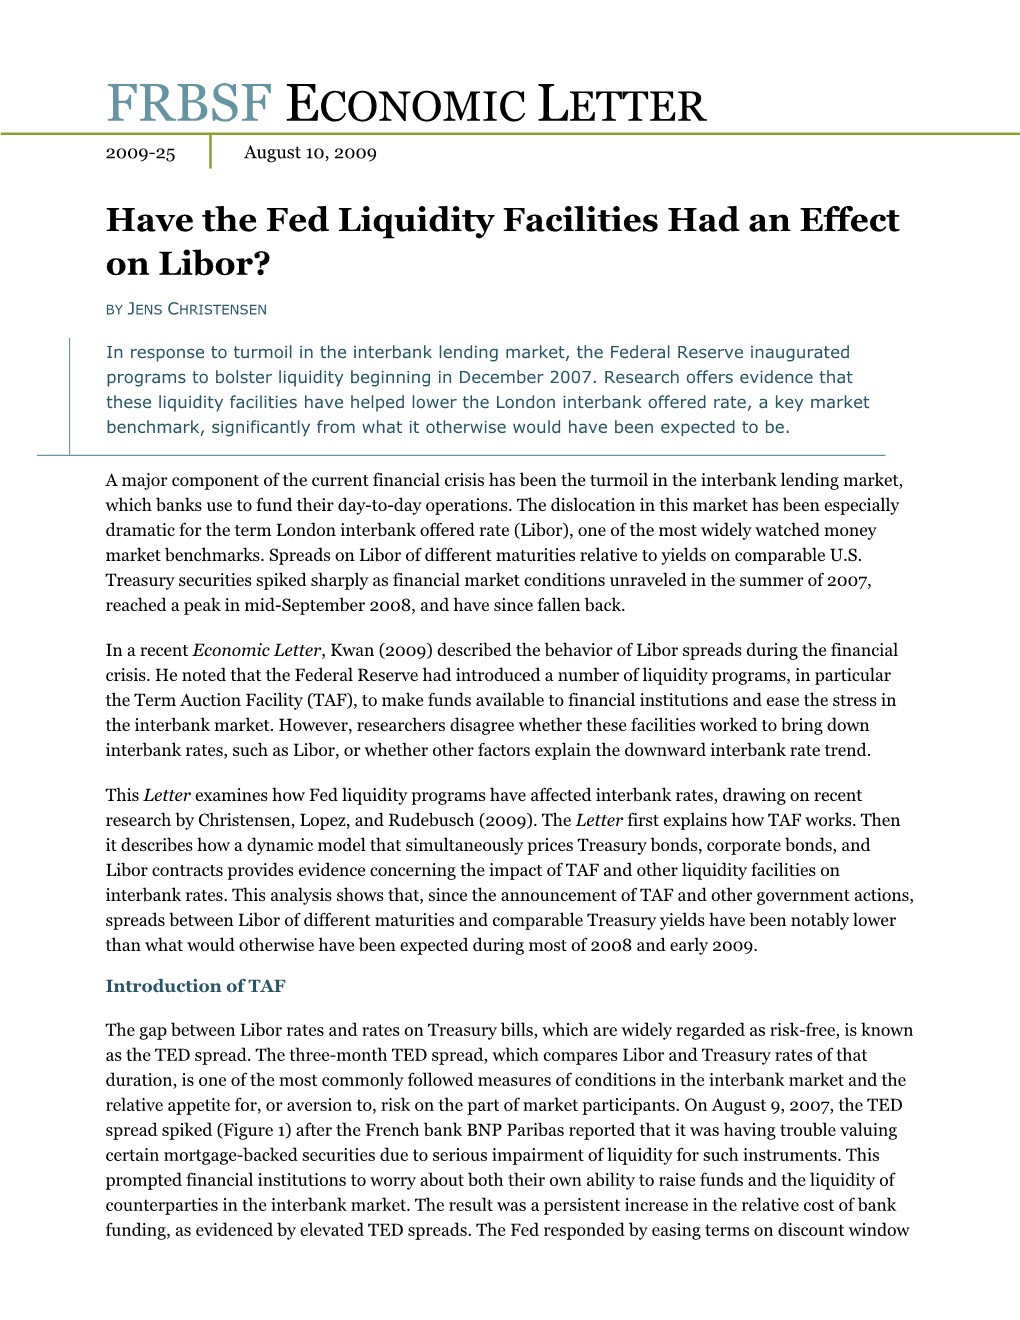 Have the Fed Liquidity Facilities Had an Effect on Libor?